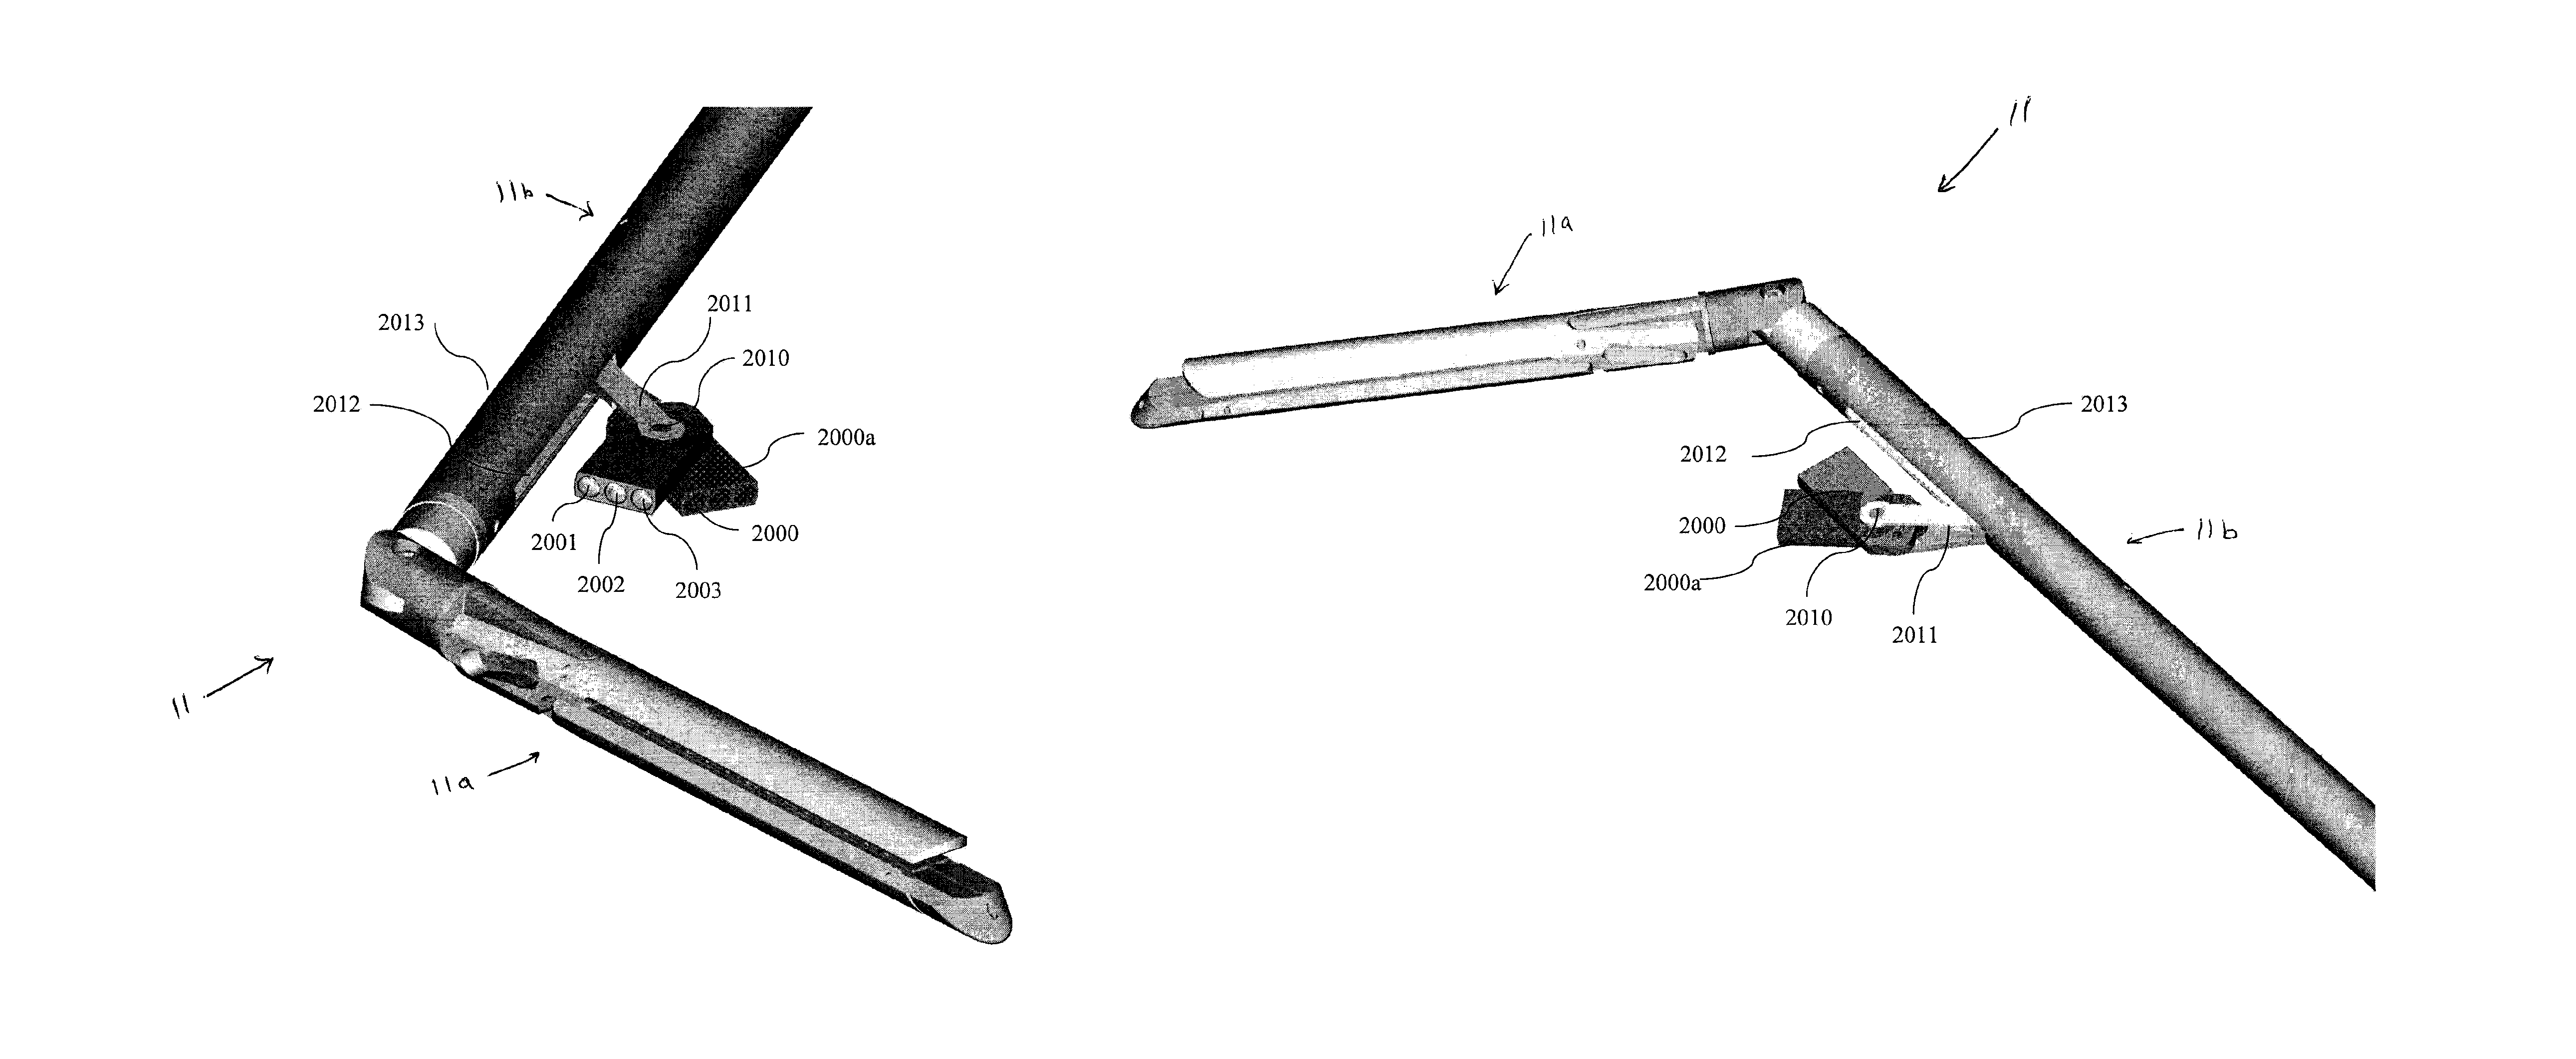 Imaging system for a surgical device